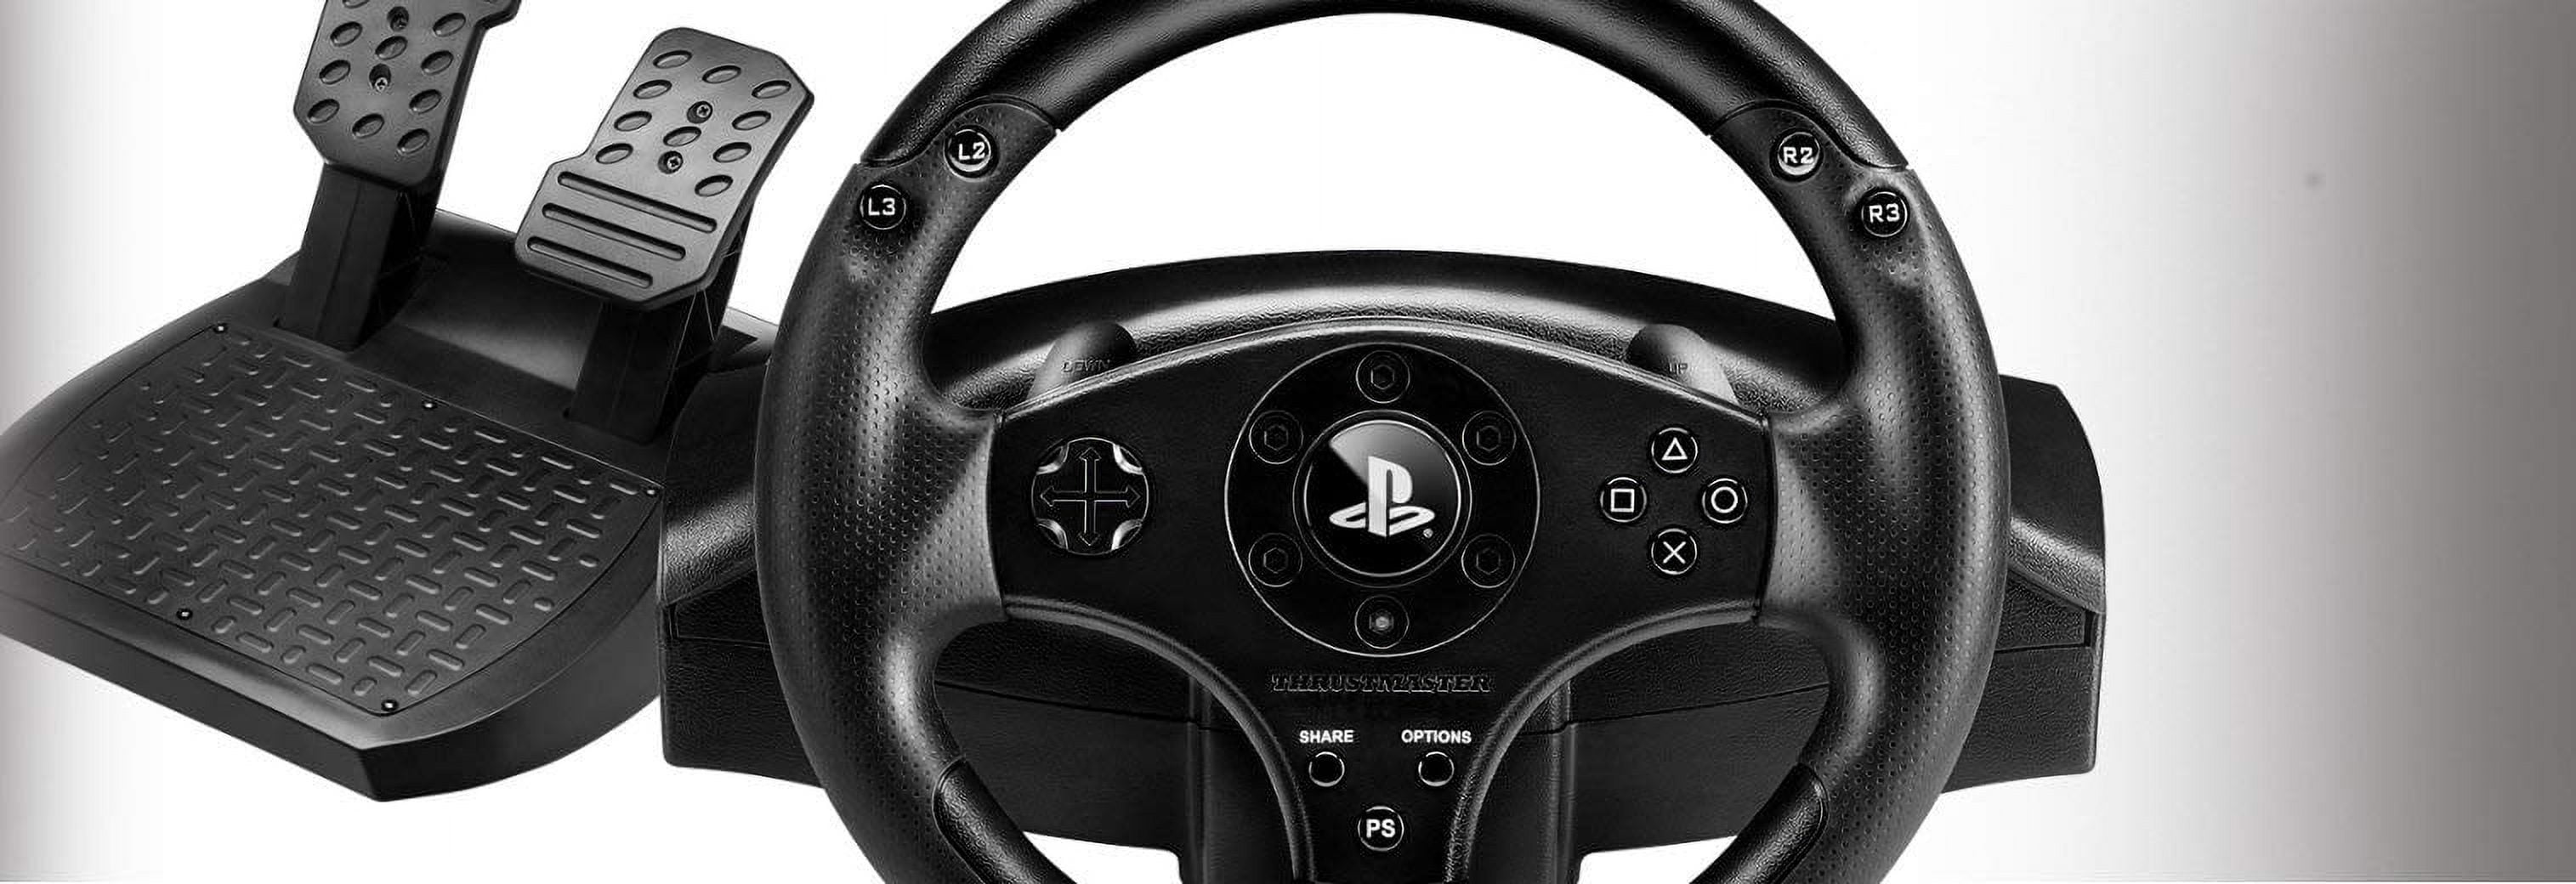 Thrustmaster T80 Racing Wheel, Games Grid and Dirt for PS3 included.  663296419446